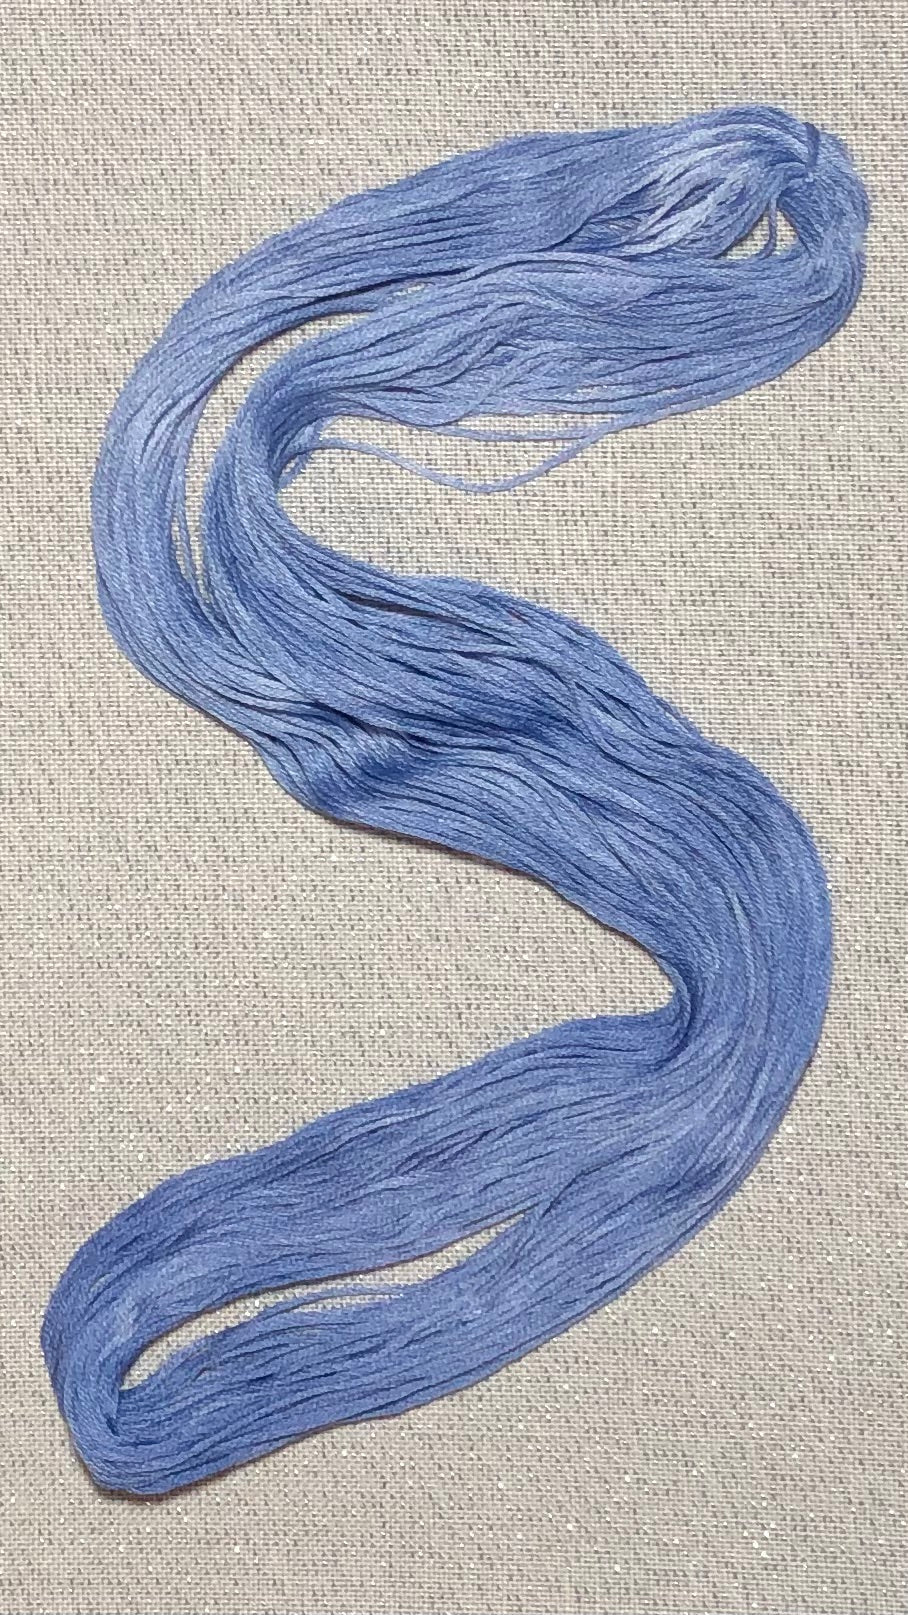 Cotton hand dyed floss - Nikko - Dyeing for Cross Stitch